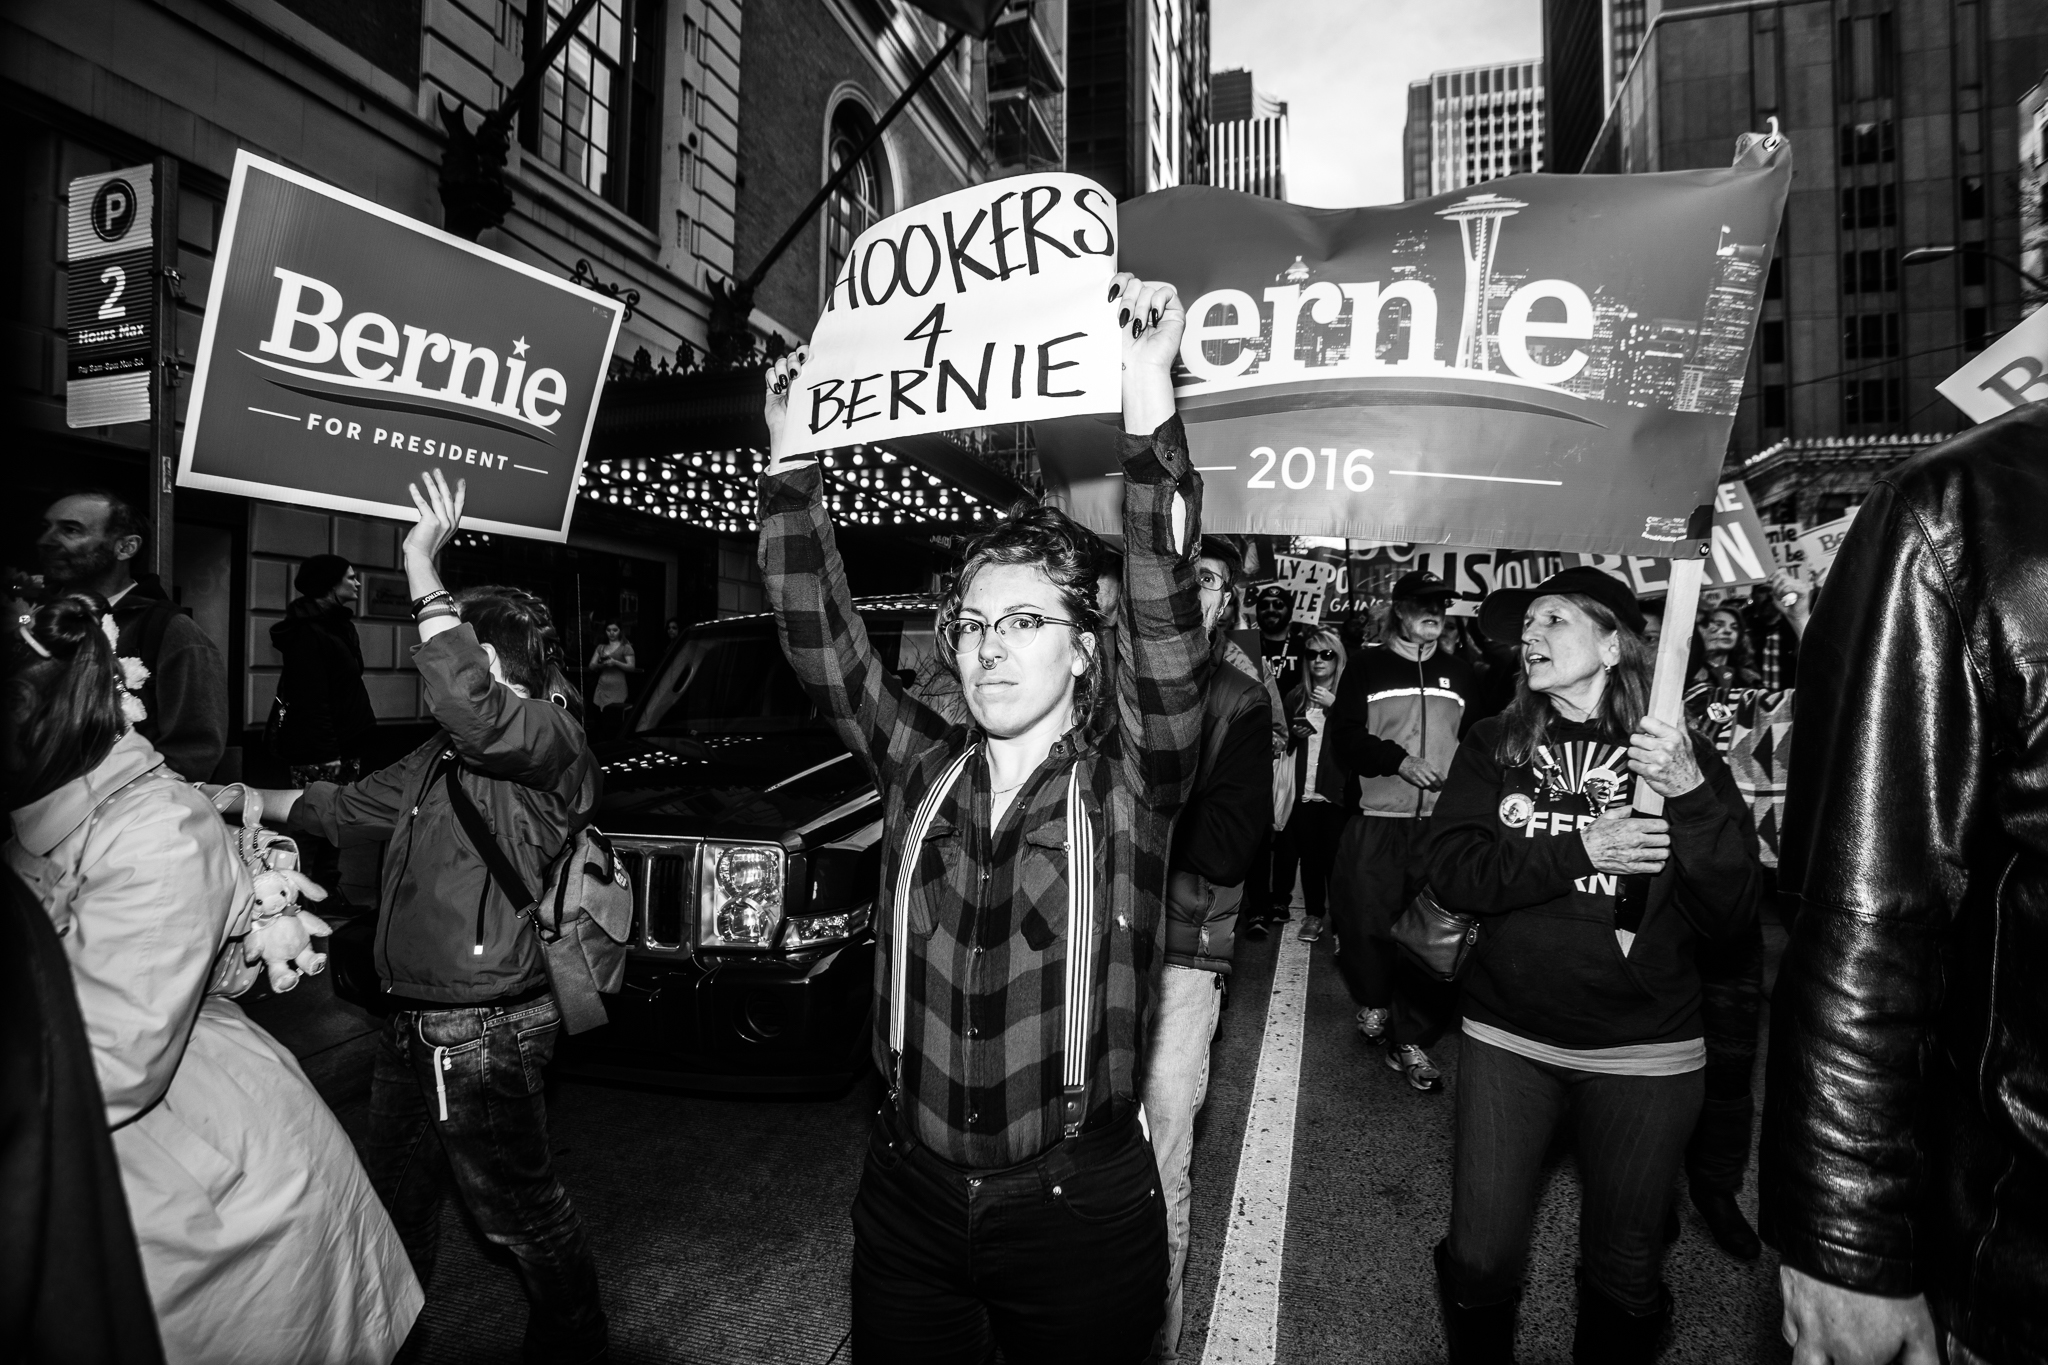 Supporters walk in a 'March for Bernie' in downtown Seattle on on Feb. 27.